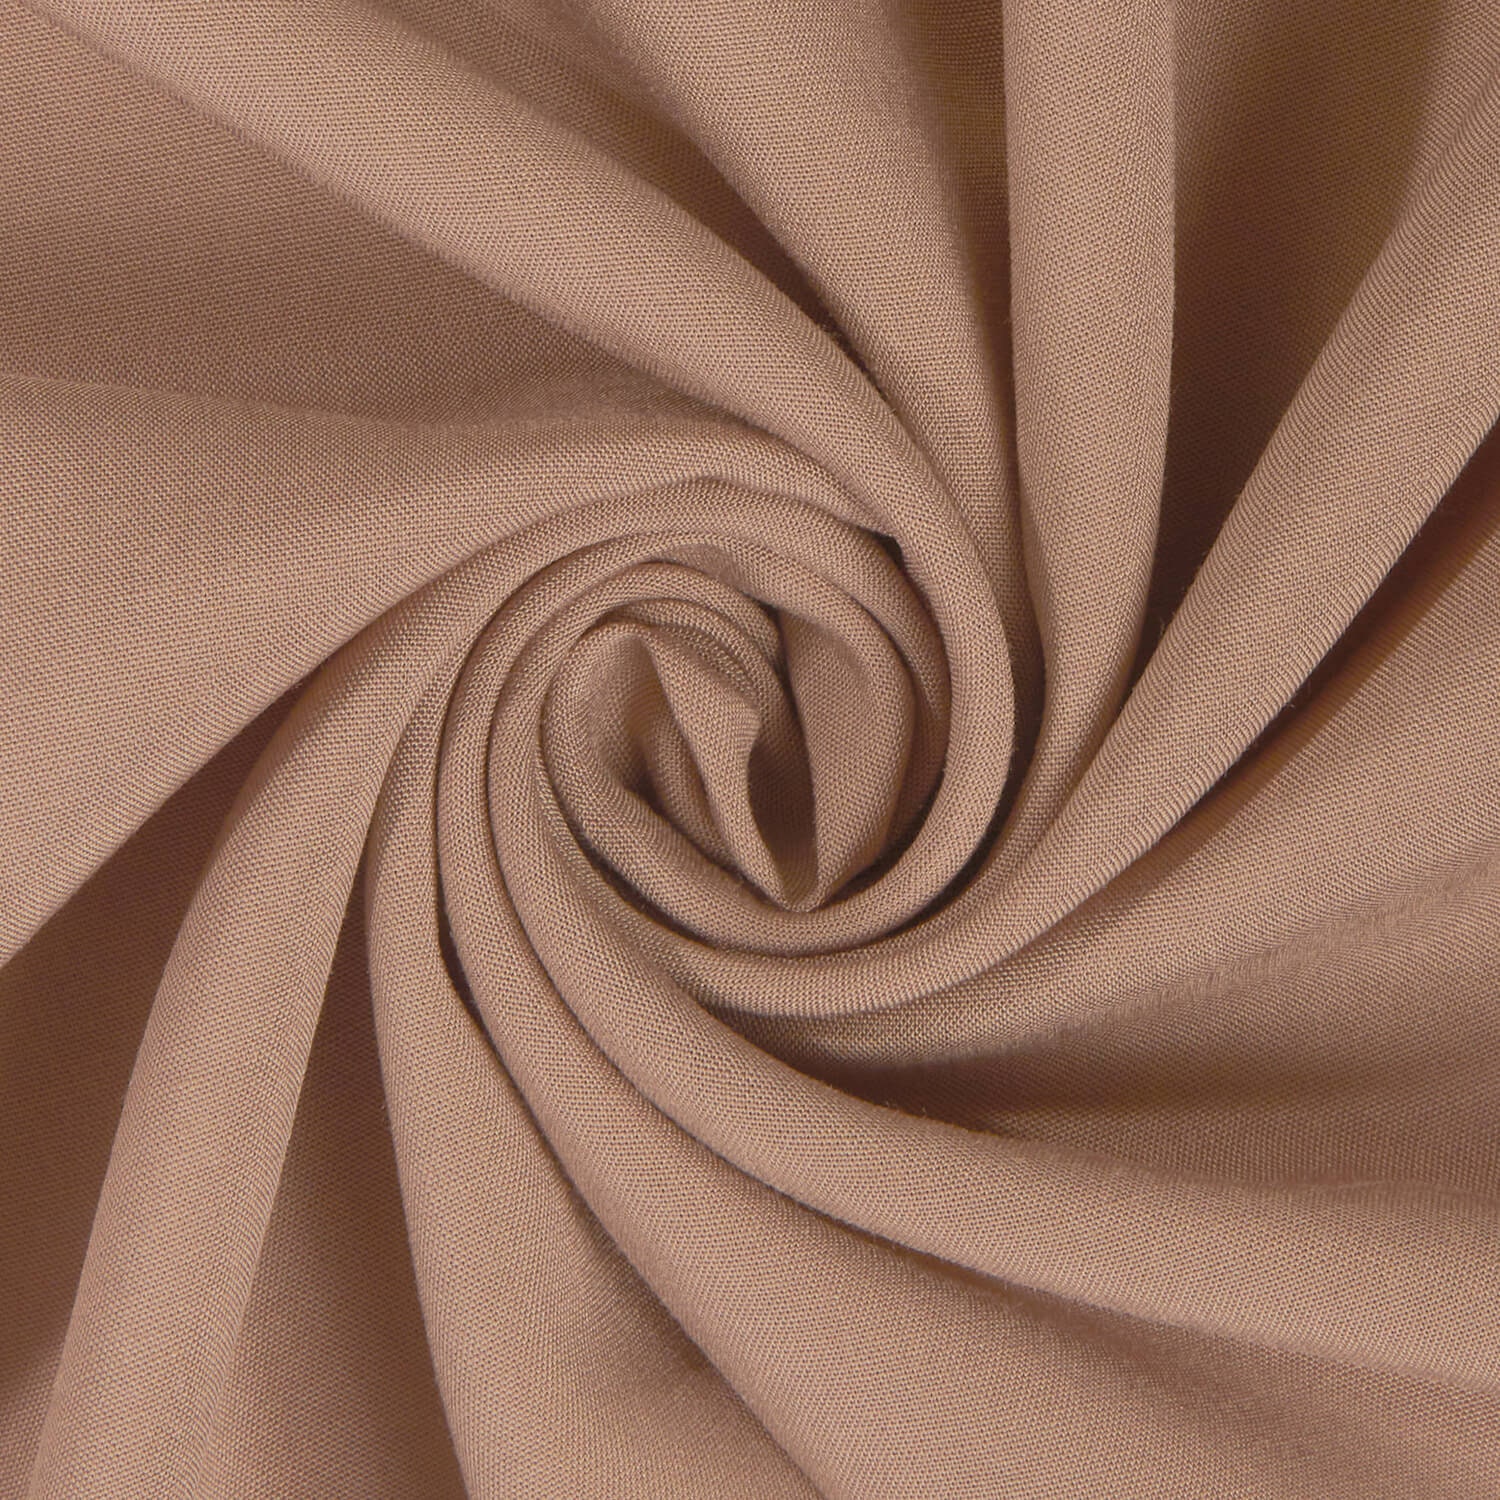 Mocha Rayon Challis Fabric 100% Rayon 53/54 Wide Sold by picture